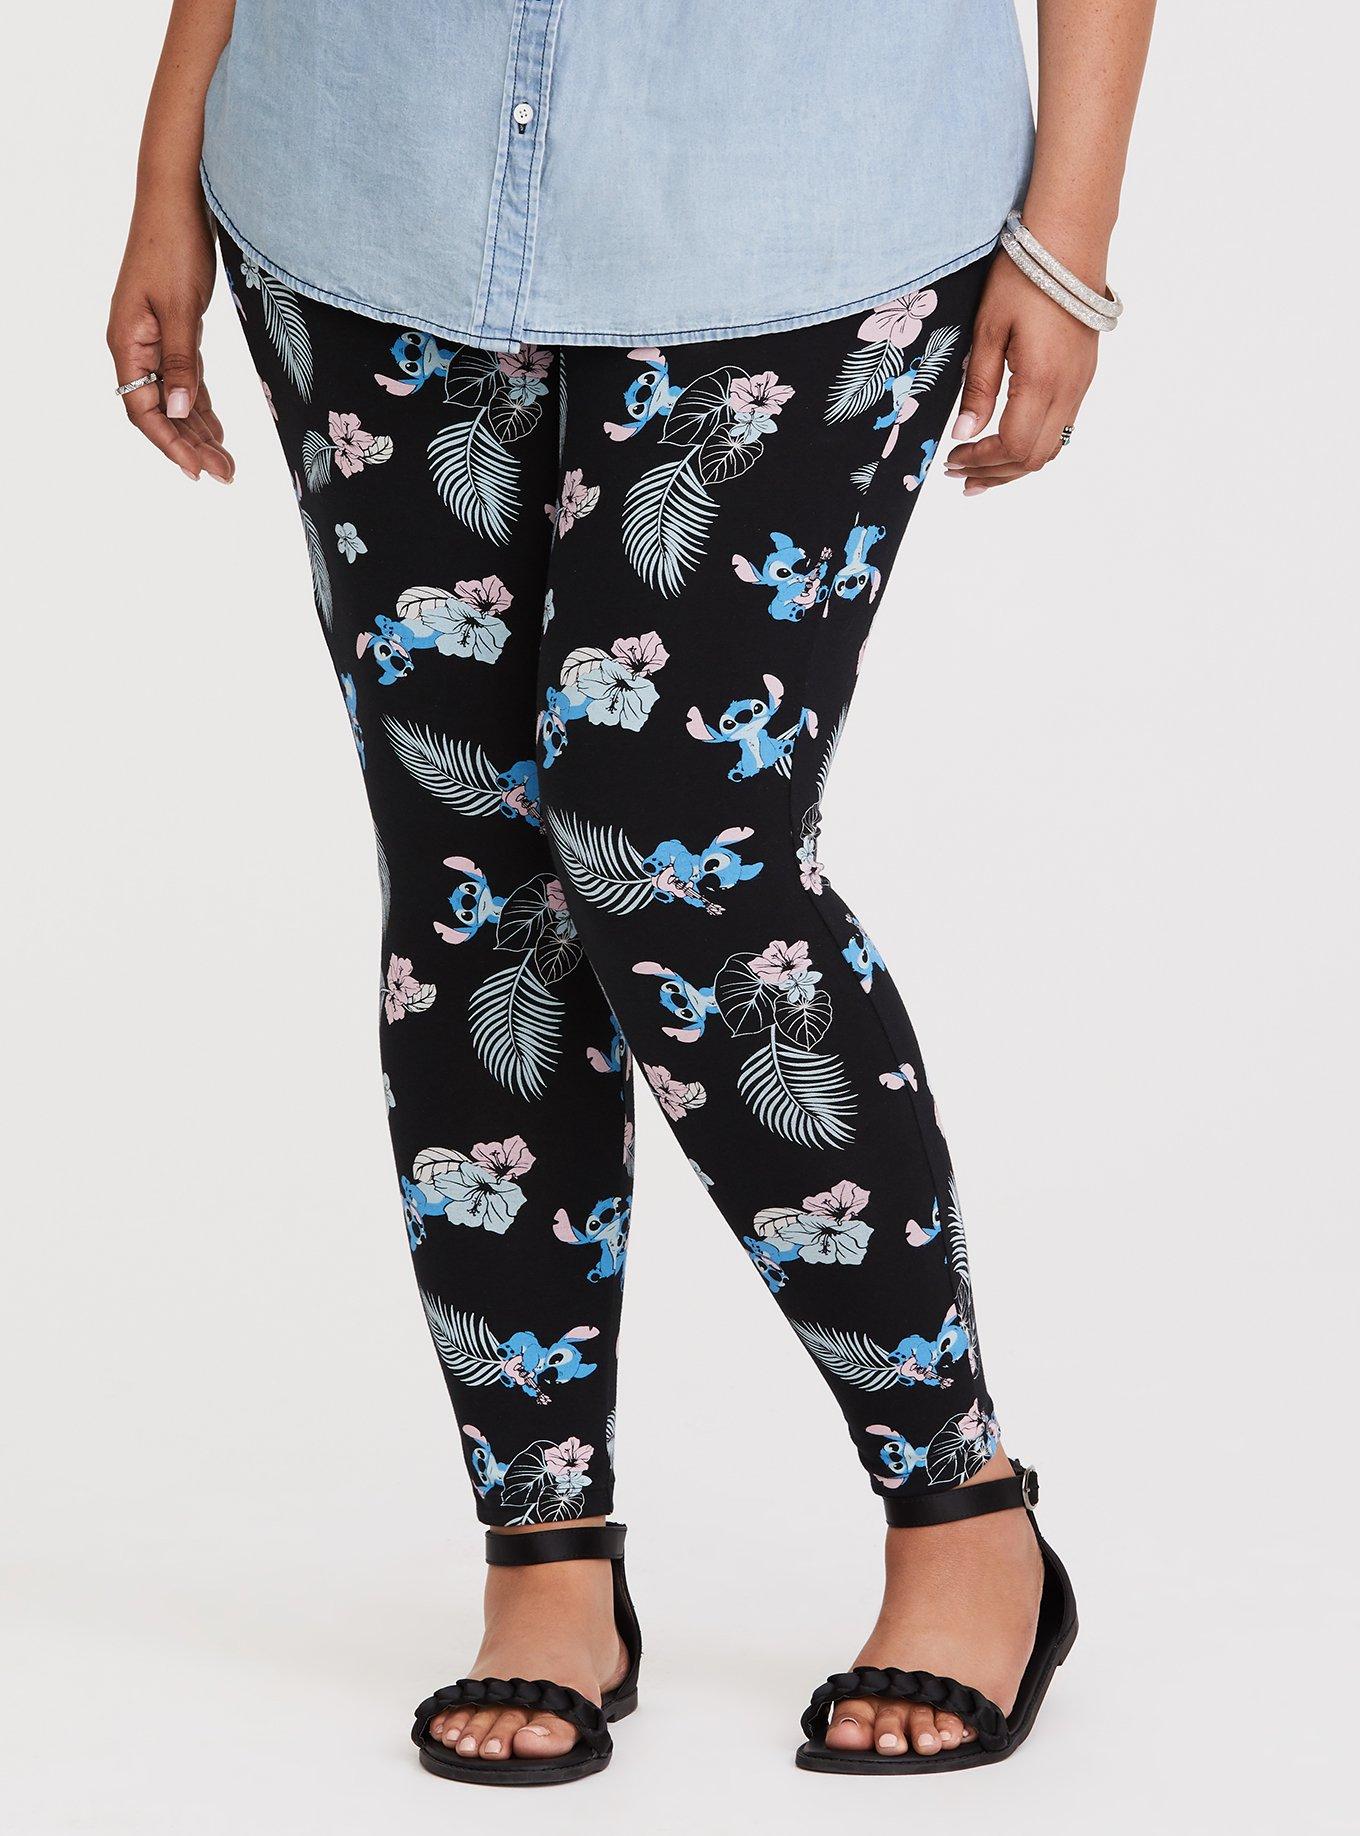 Disney Parks STITCH Leggings 2XL Women - NEW With Tags 